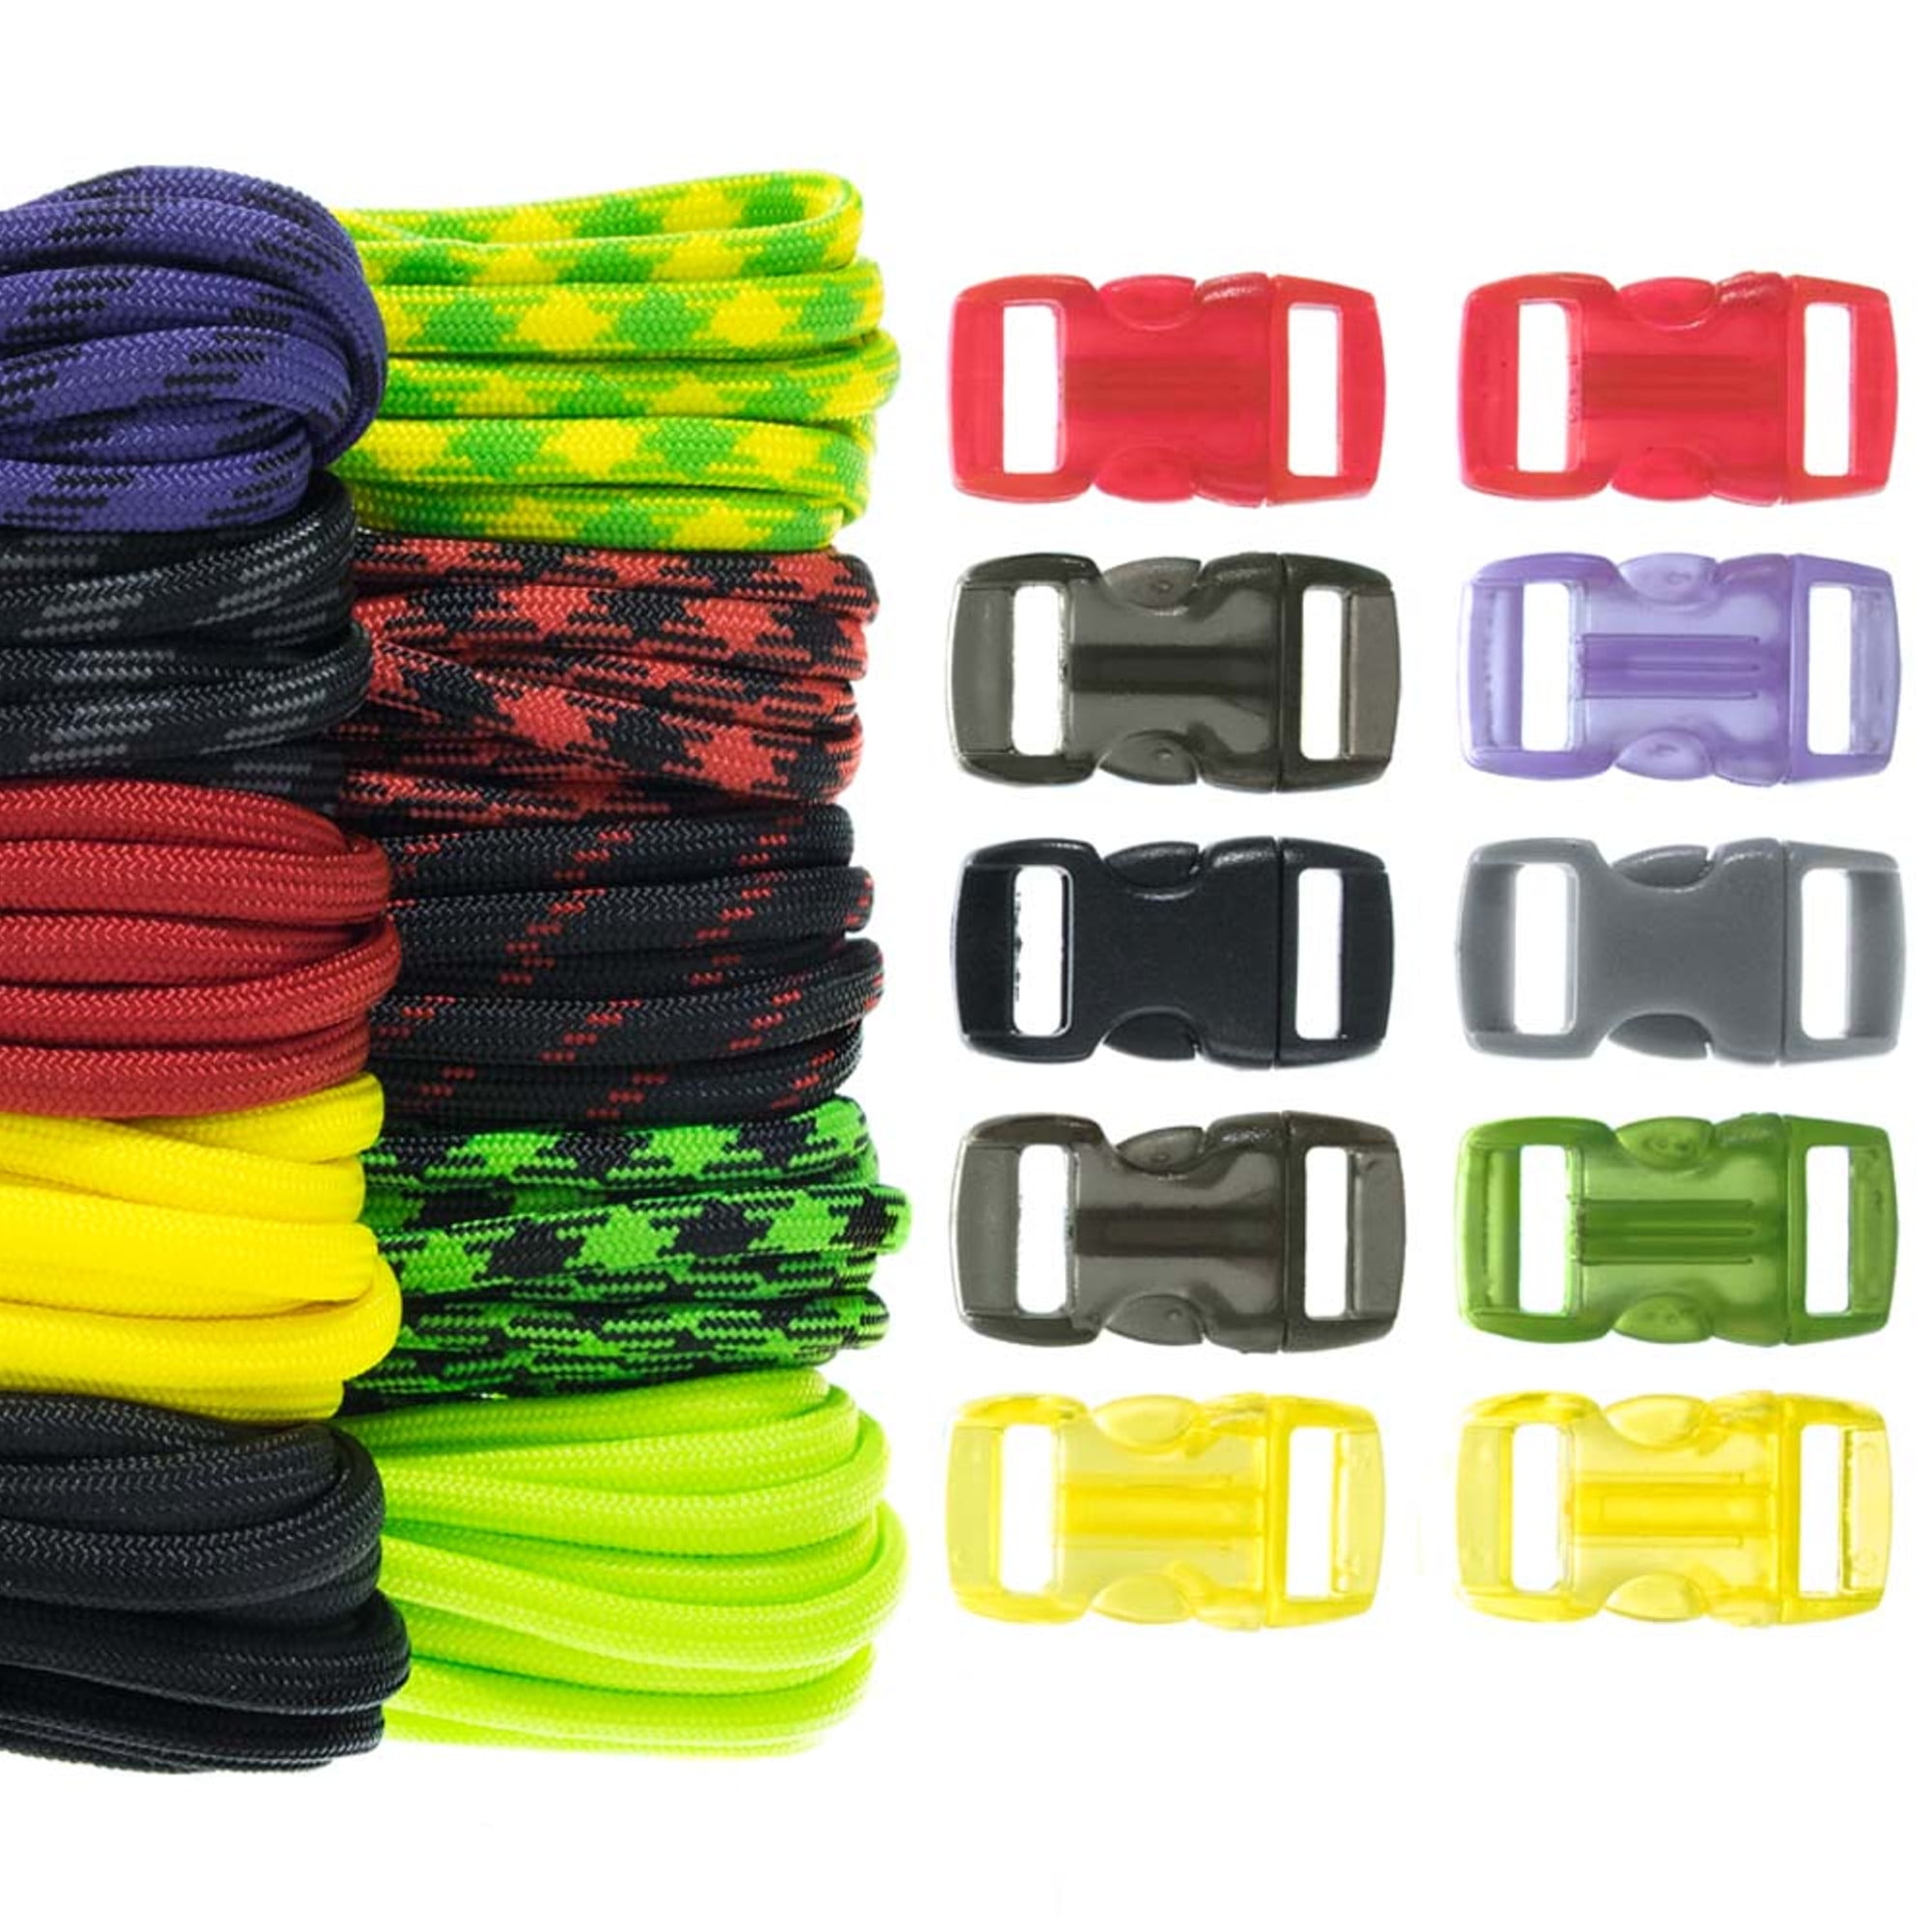 BoredParacord 550lb Type III Paracord Combo Crafting Kits with Buckles